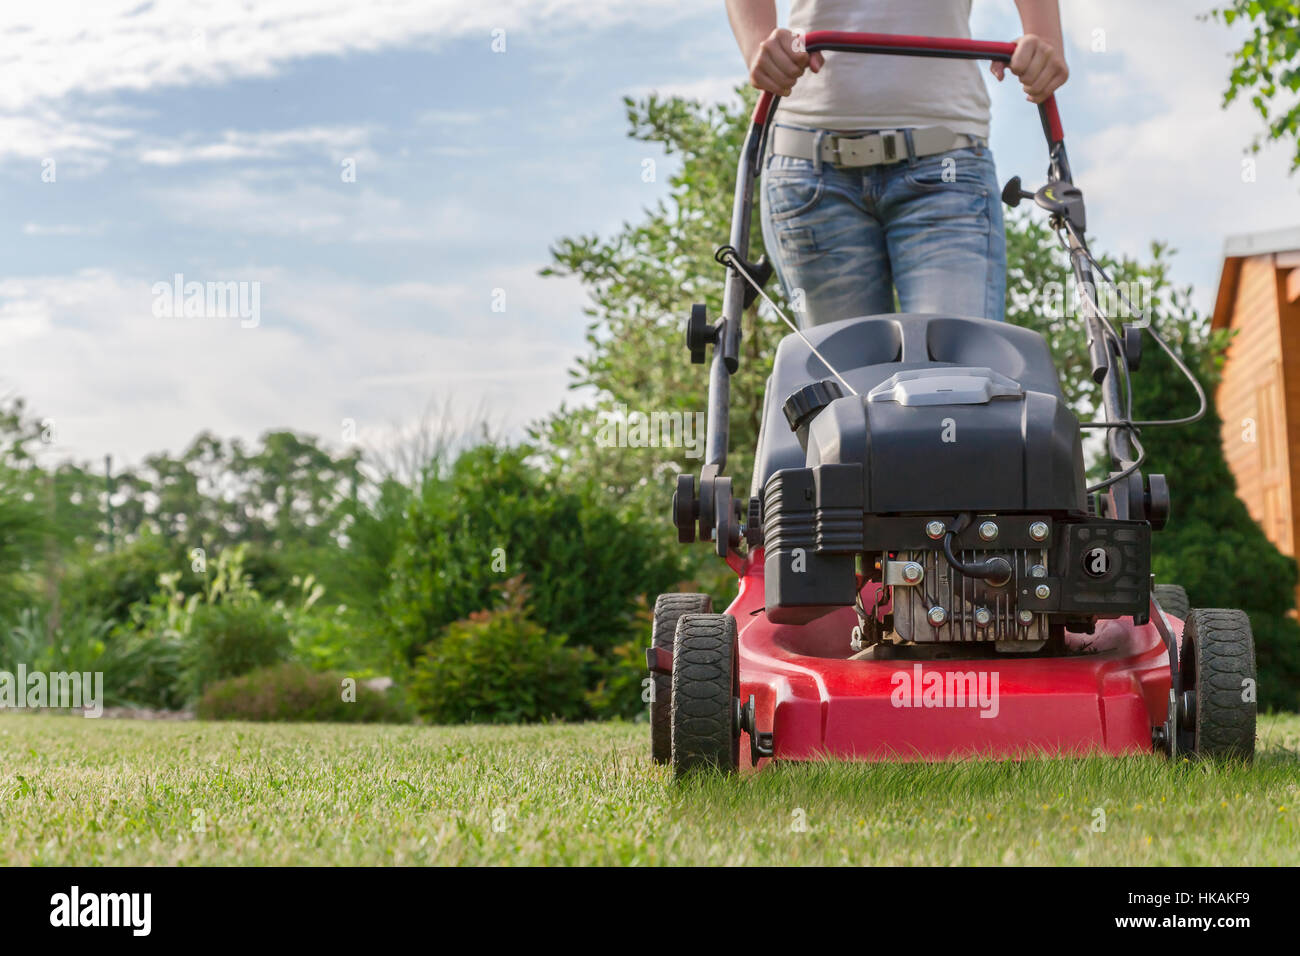 Anonymous woman mowing the lawn with a motorized lawnmower Stock Photo